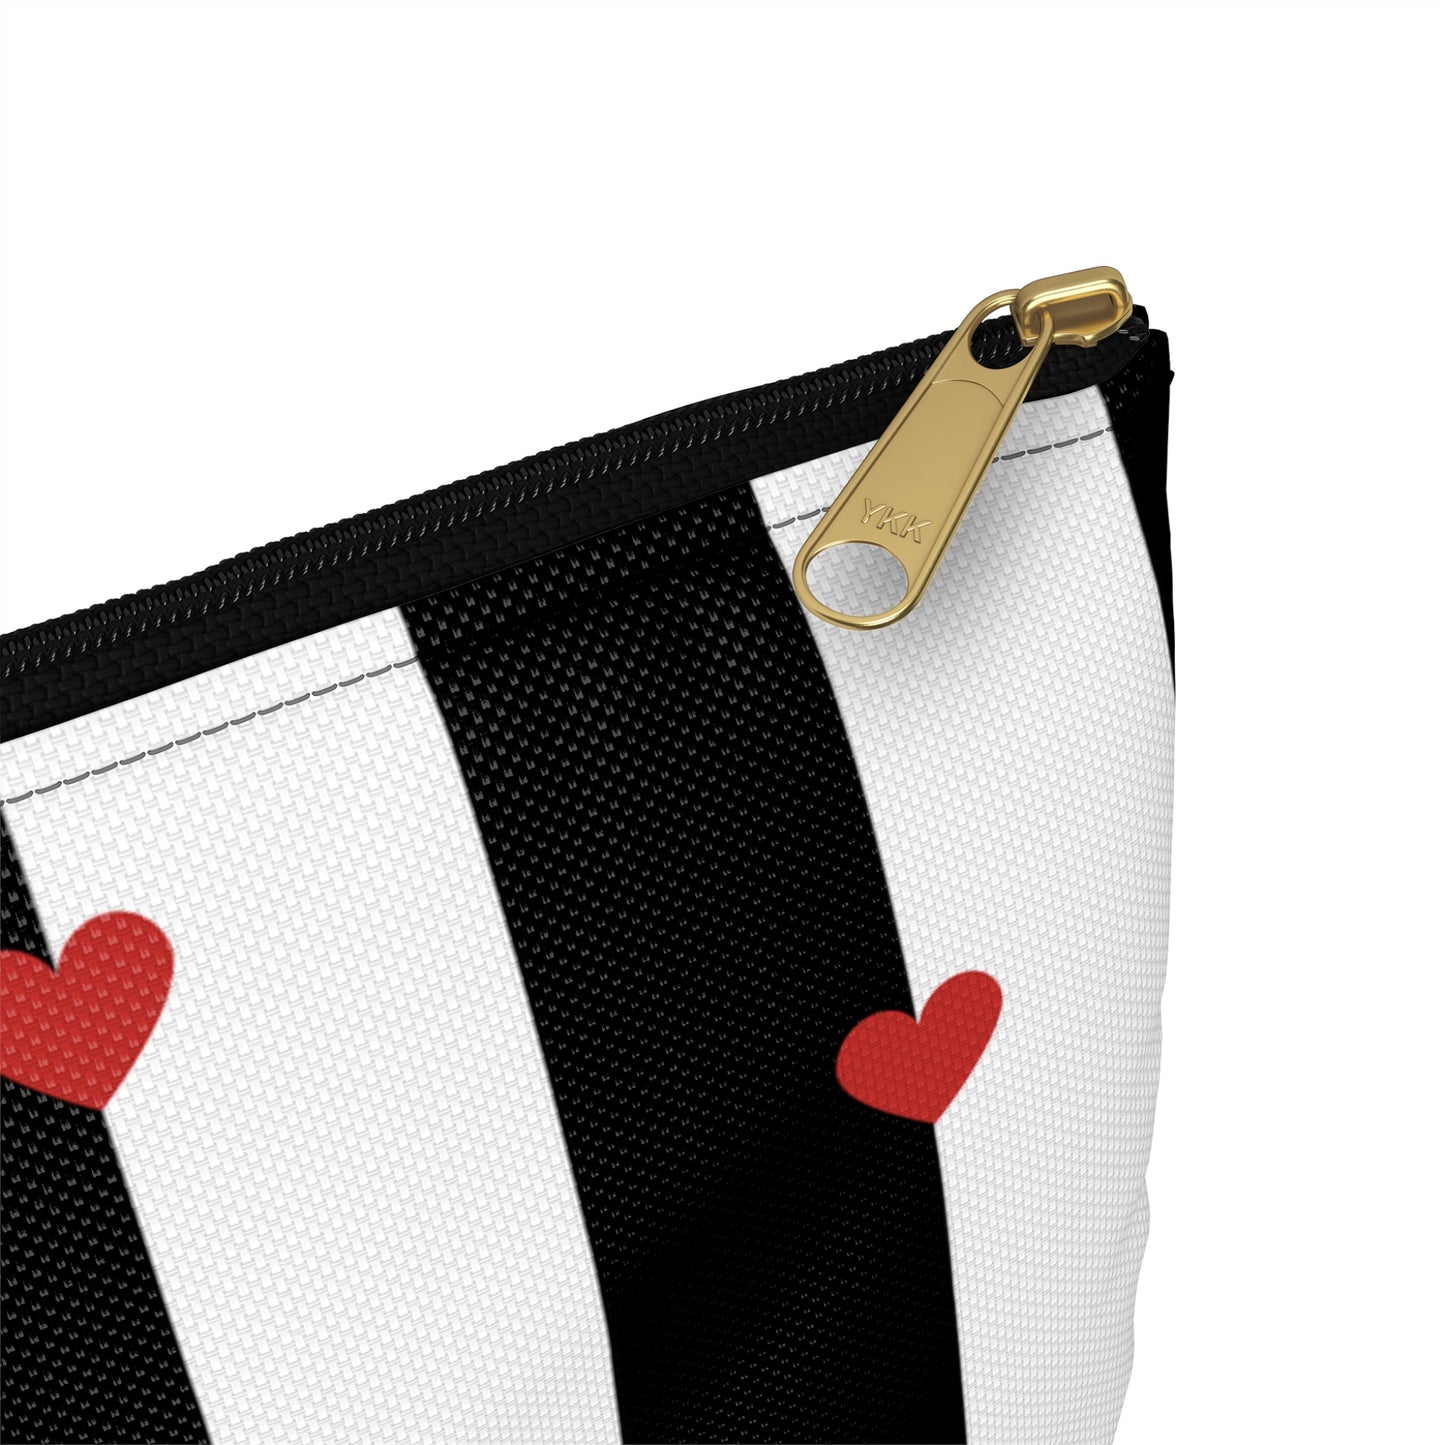 Flamenco lover Accessory Pouch, flamenco dancer in a red dress and white and black stripes with little hearts. - IllustrArte